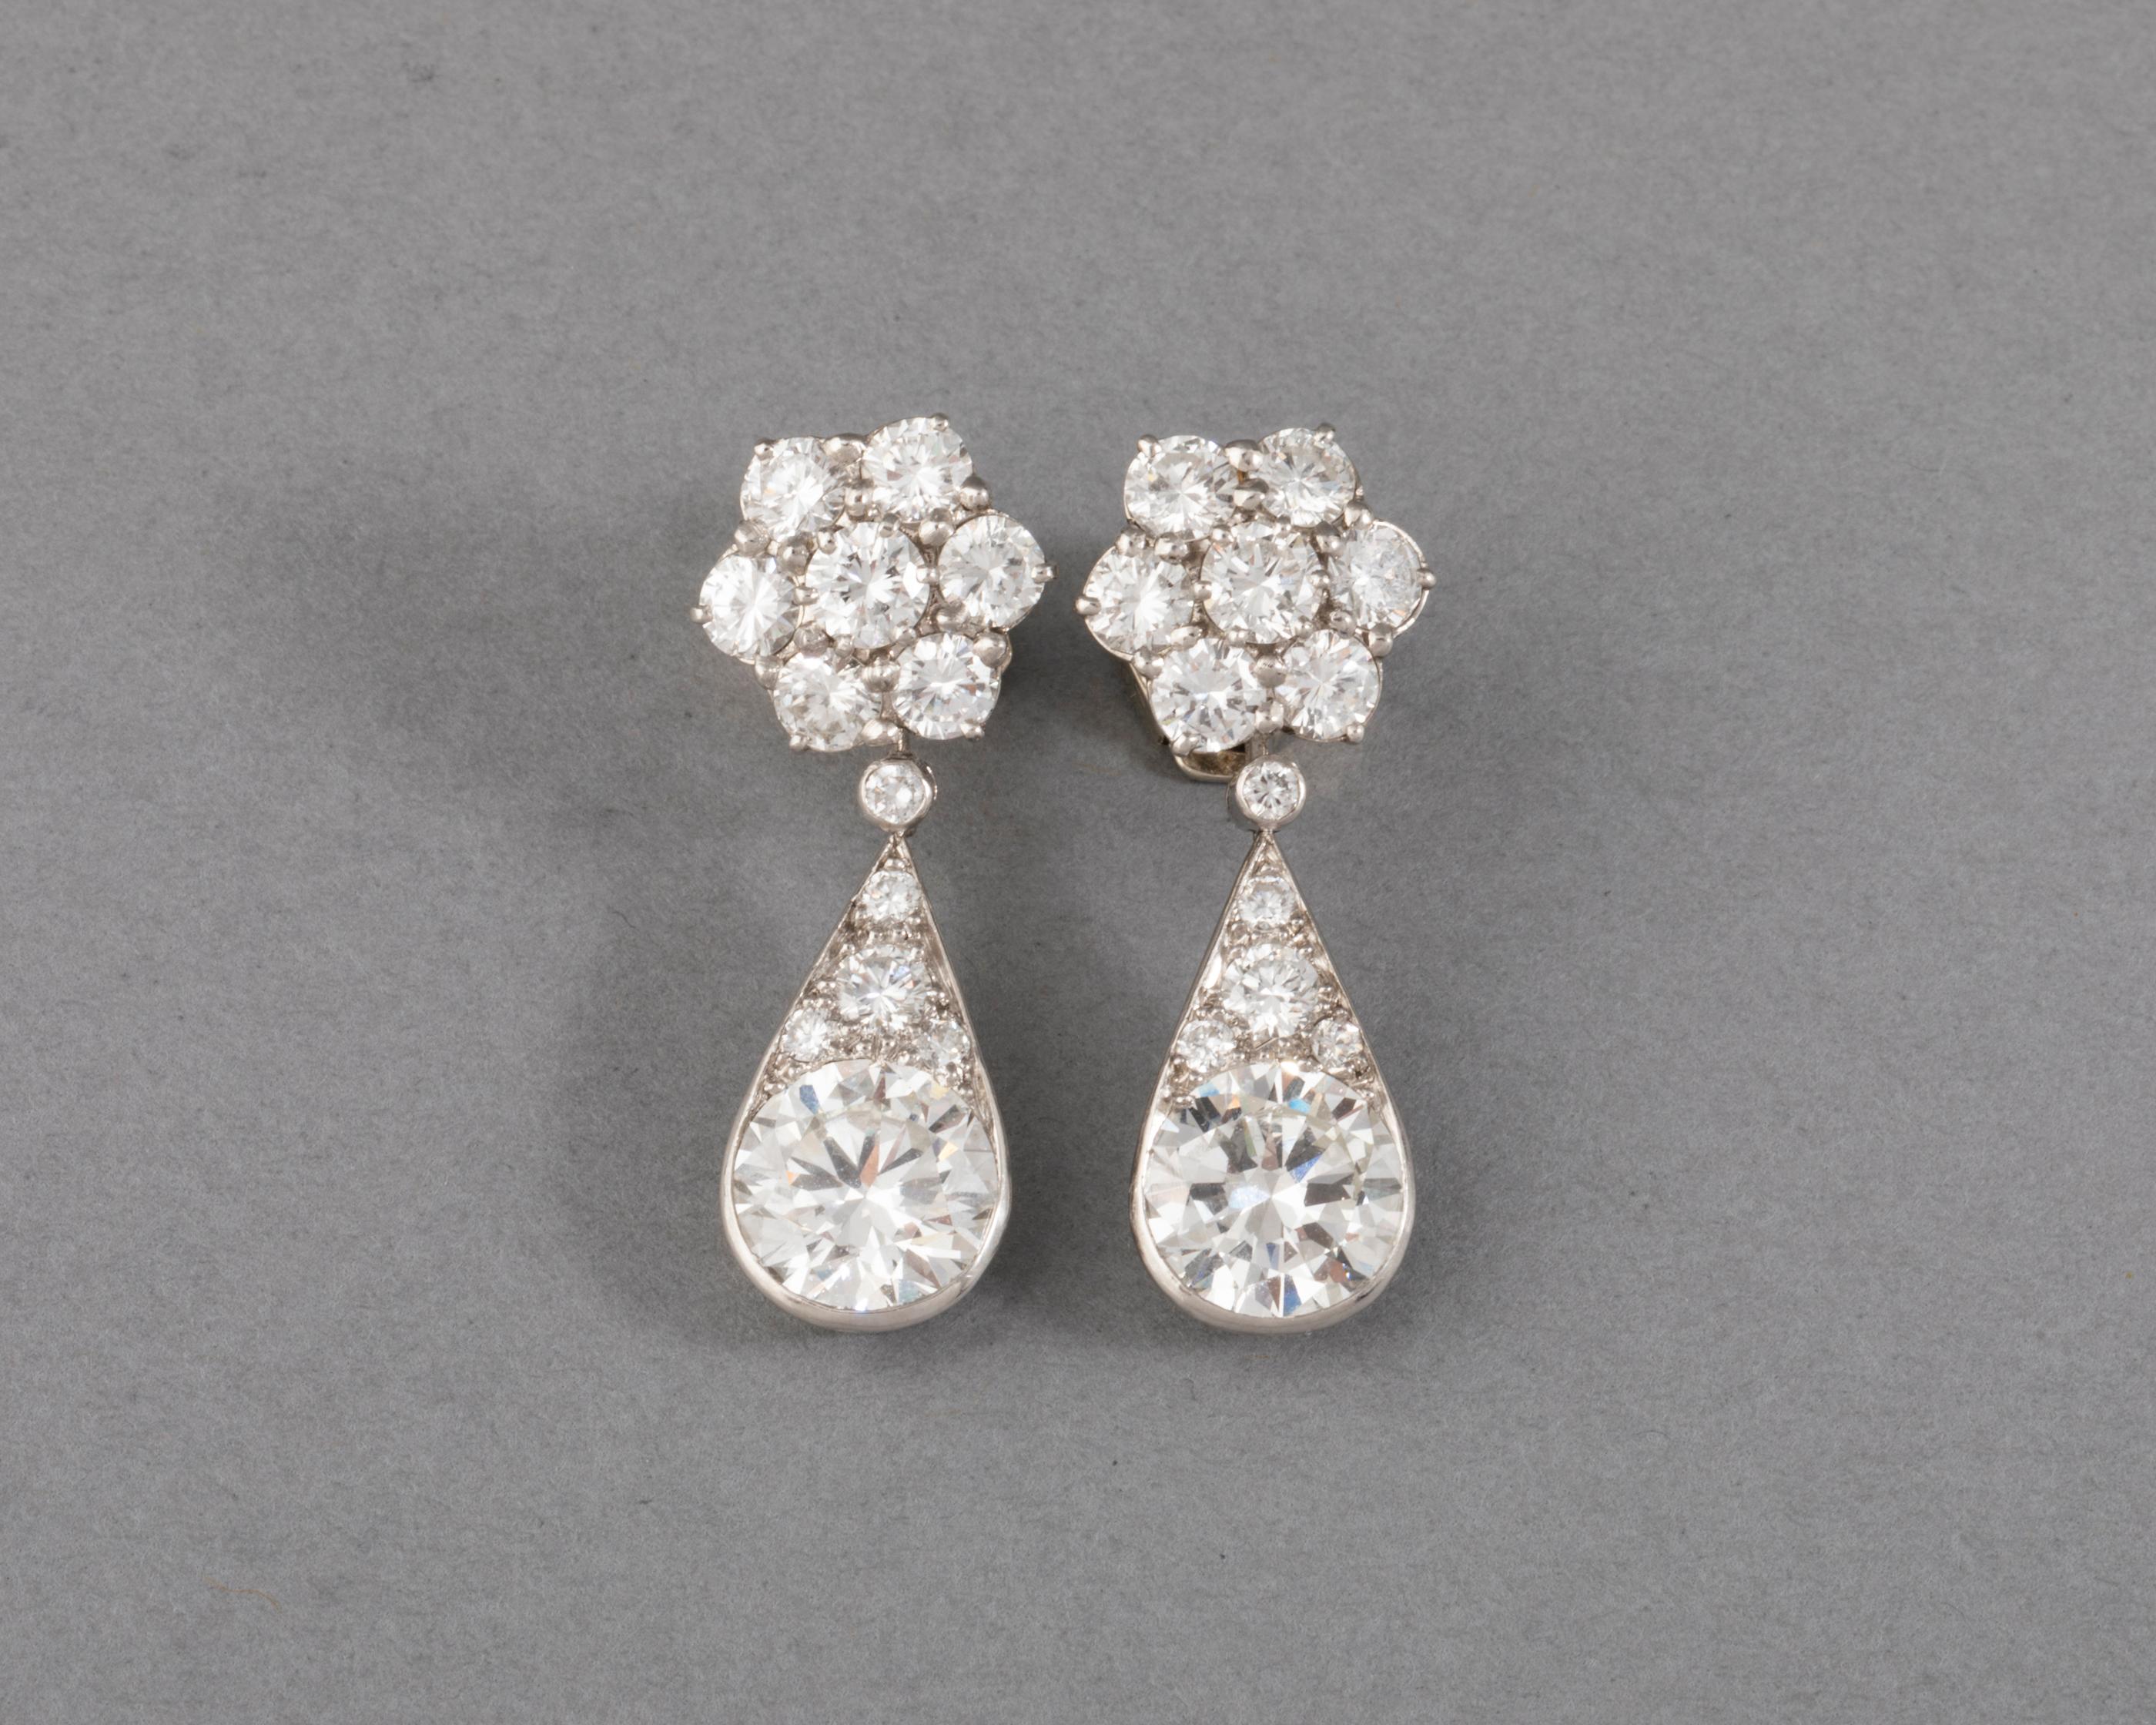 6.60 Carats Diamonds French Art Deco Earrings

Very beautiful pair of earrings, made in France circa 1930.

Made in Platinum (dog head marks) and white gold (eagle head marks).
Mark of the Maker (Unknown).
The diamonds are very good quality, the two